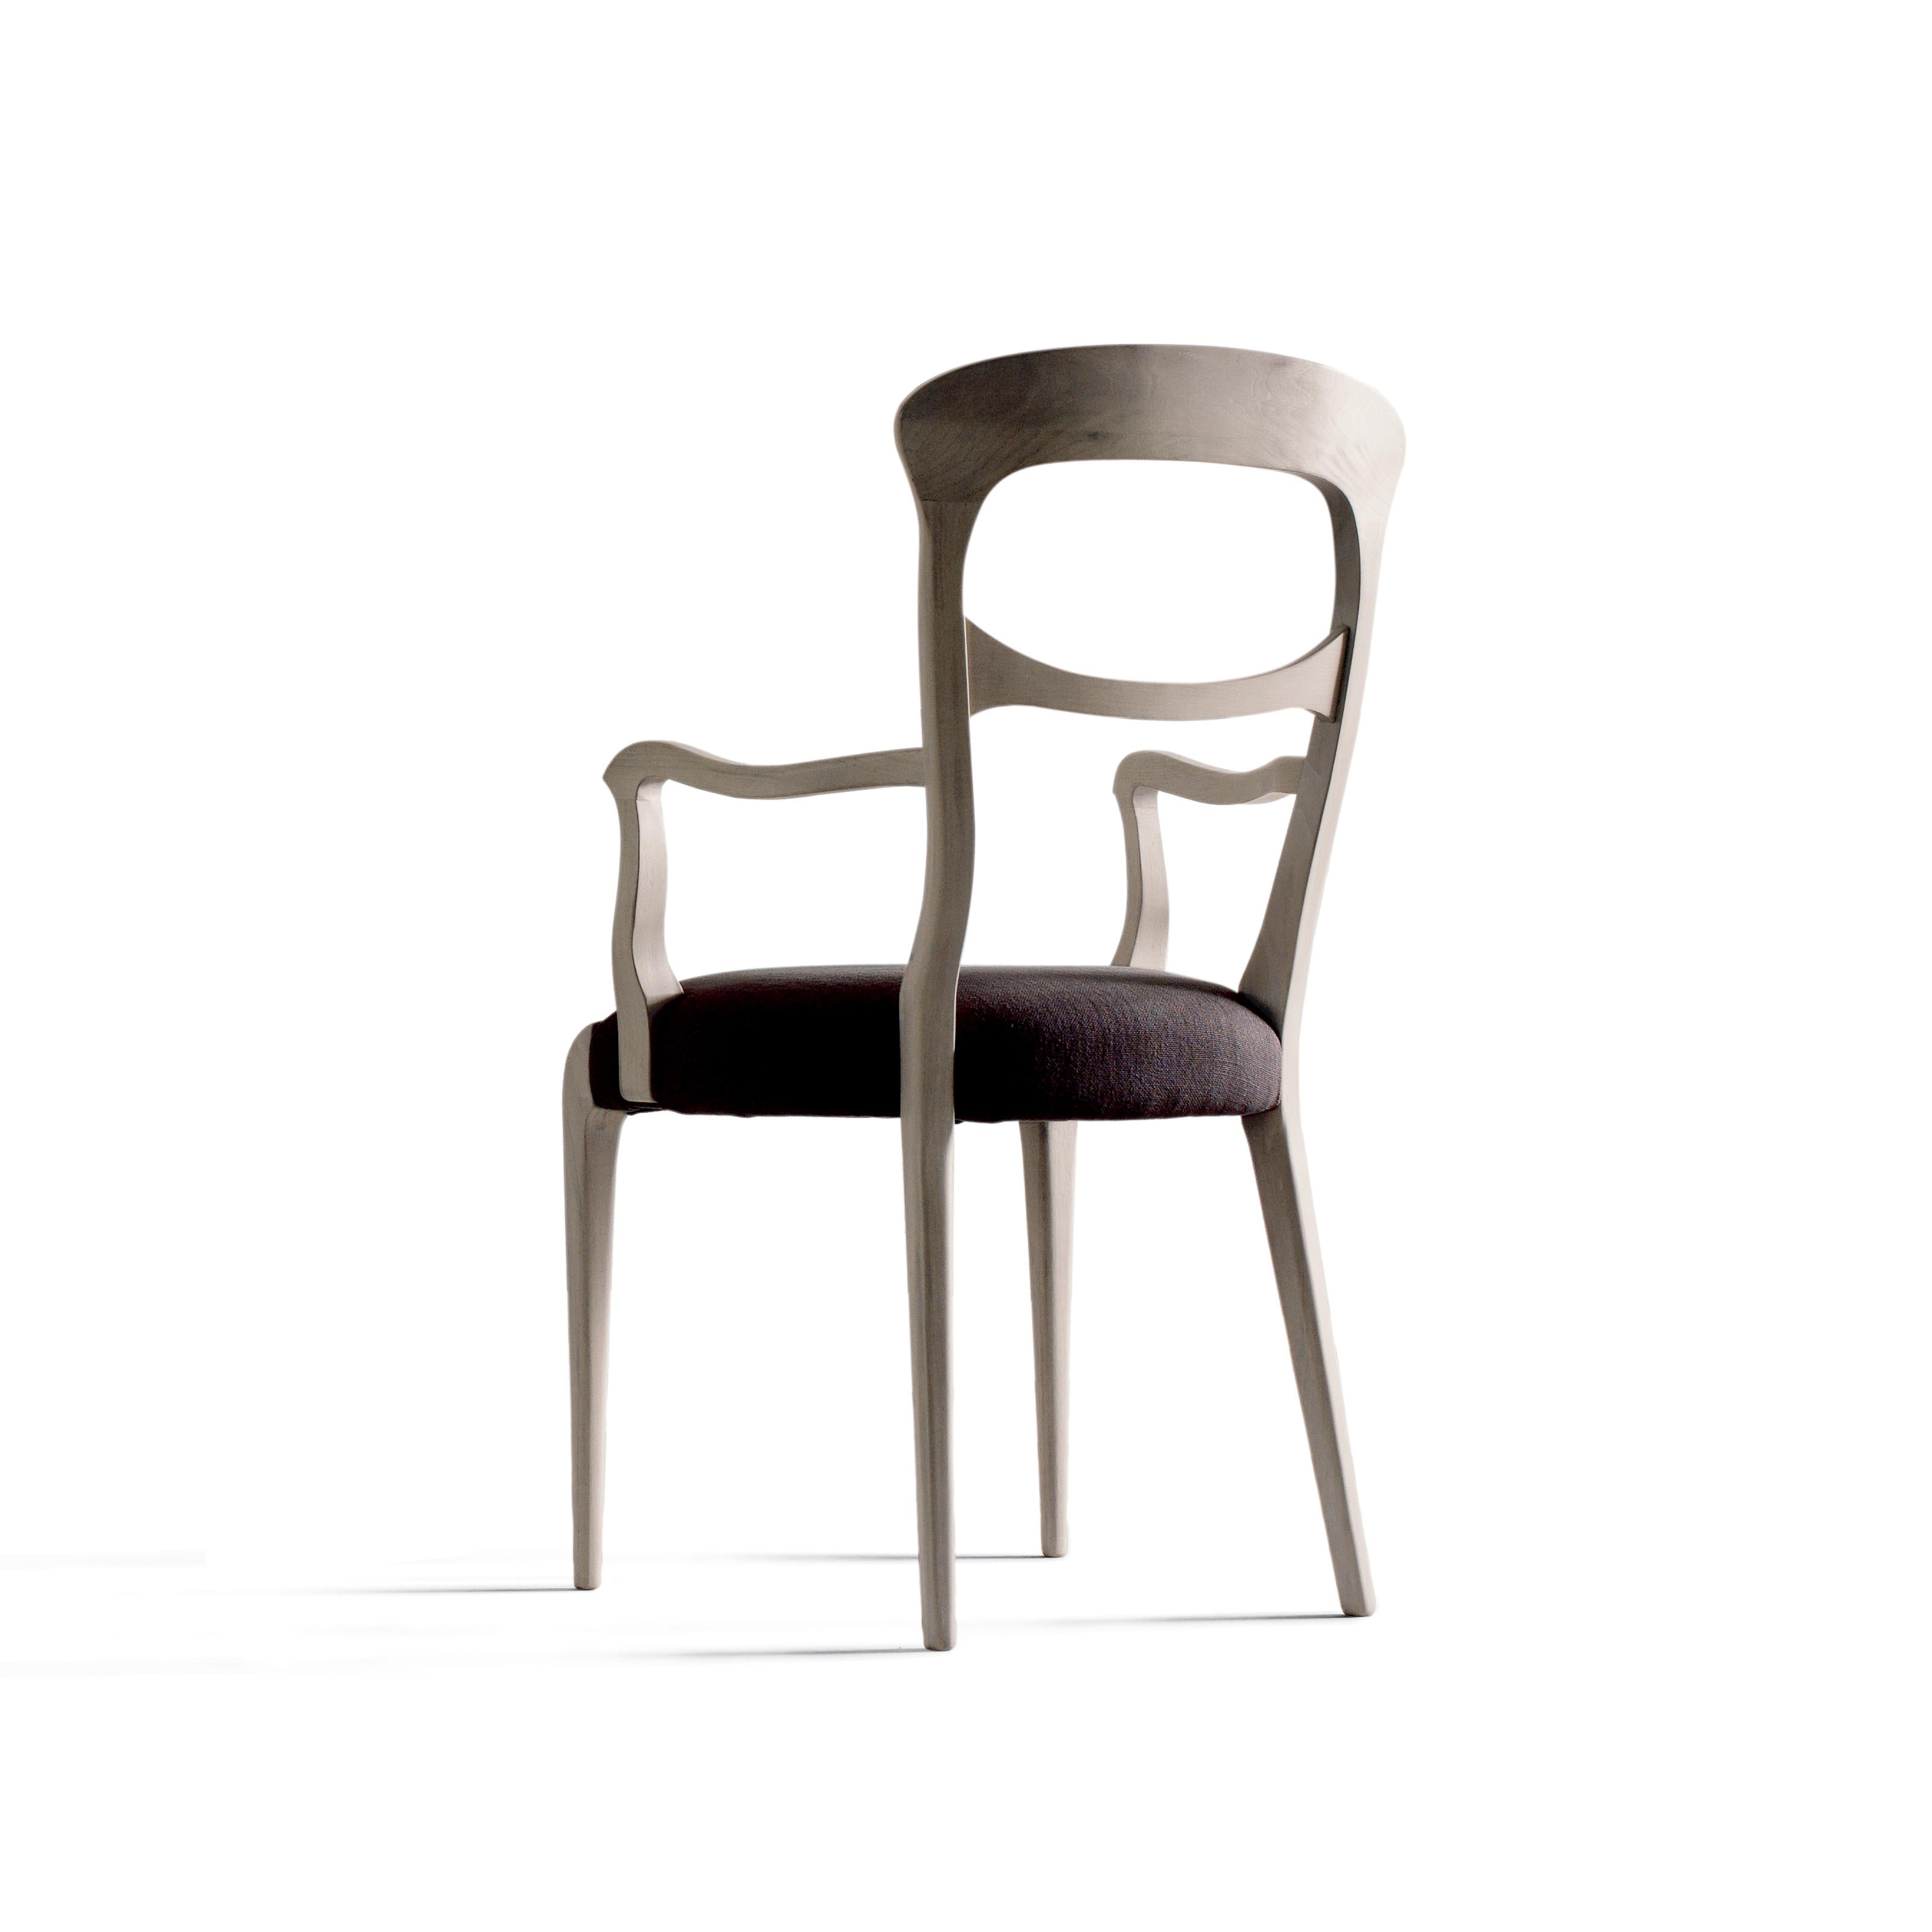 The Capotavola solid wood chair embodies the refined elegance of Italian design. Made in Italy by hand, it features solid canaletto walnut structure with acrylic finish and lining in premium leather or fabric in a range of different colors.